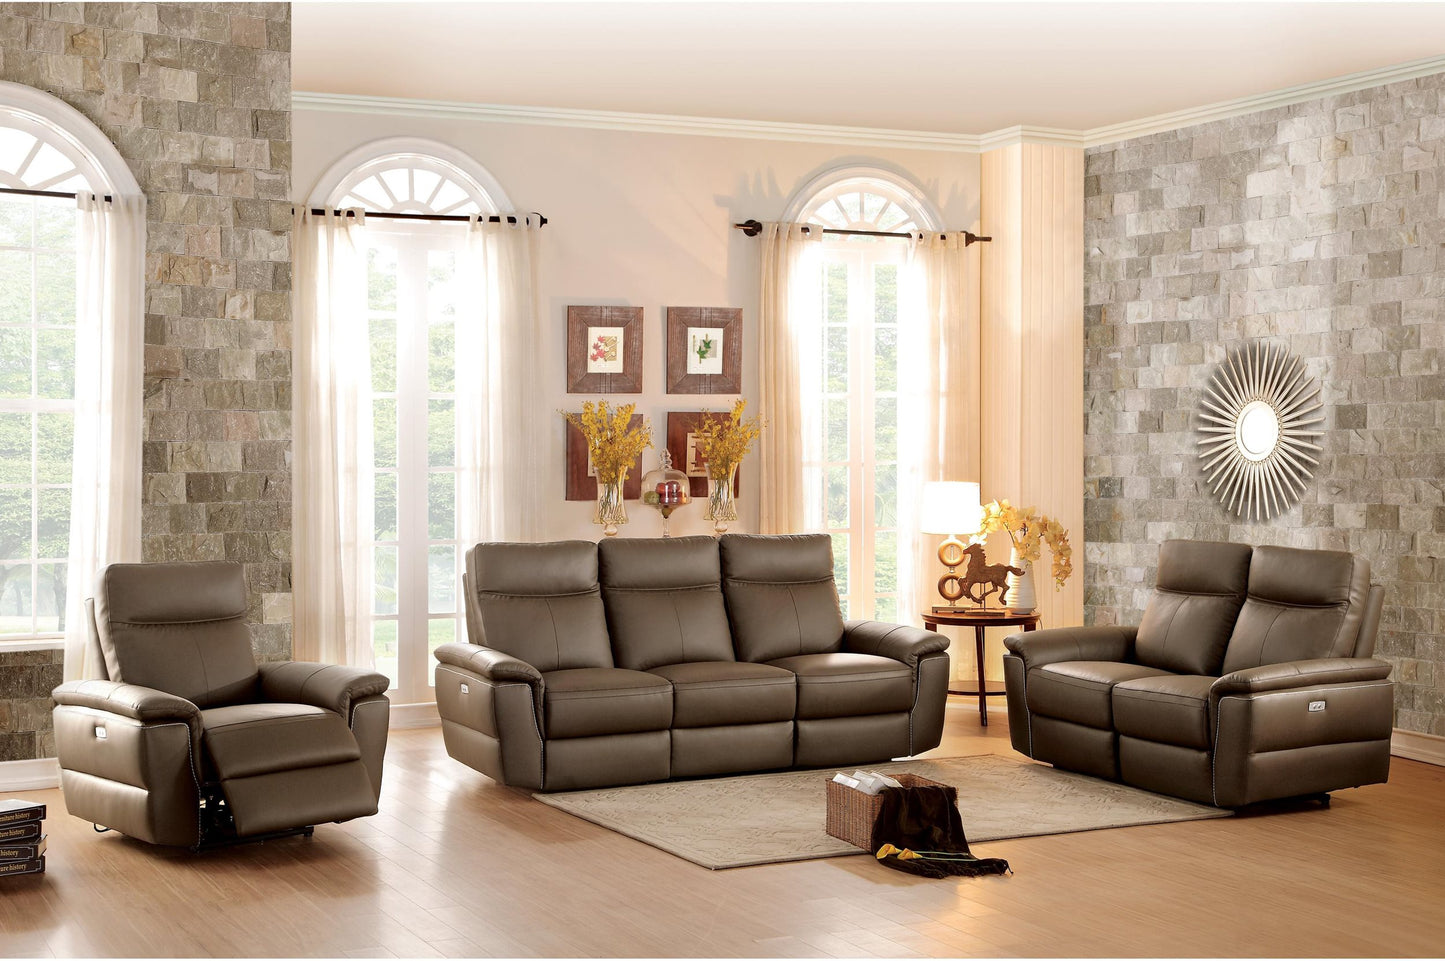 Homelegance Olympia 2PC Power Double Reclining Sofa & Double Reclining Love Seat in Top Grain Leather - Raisin